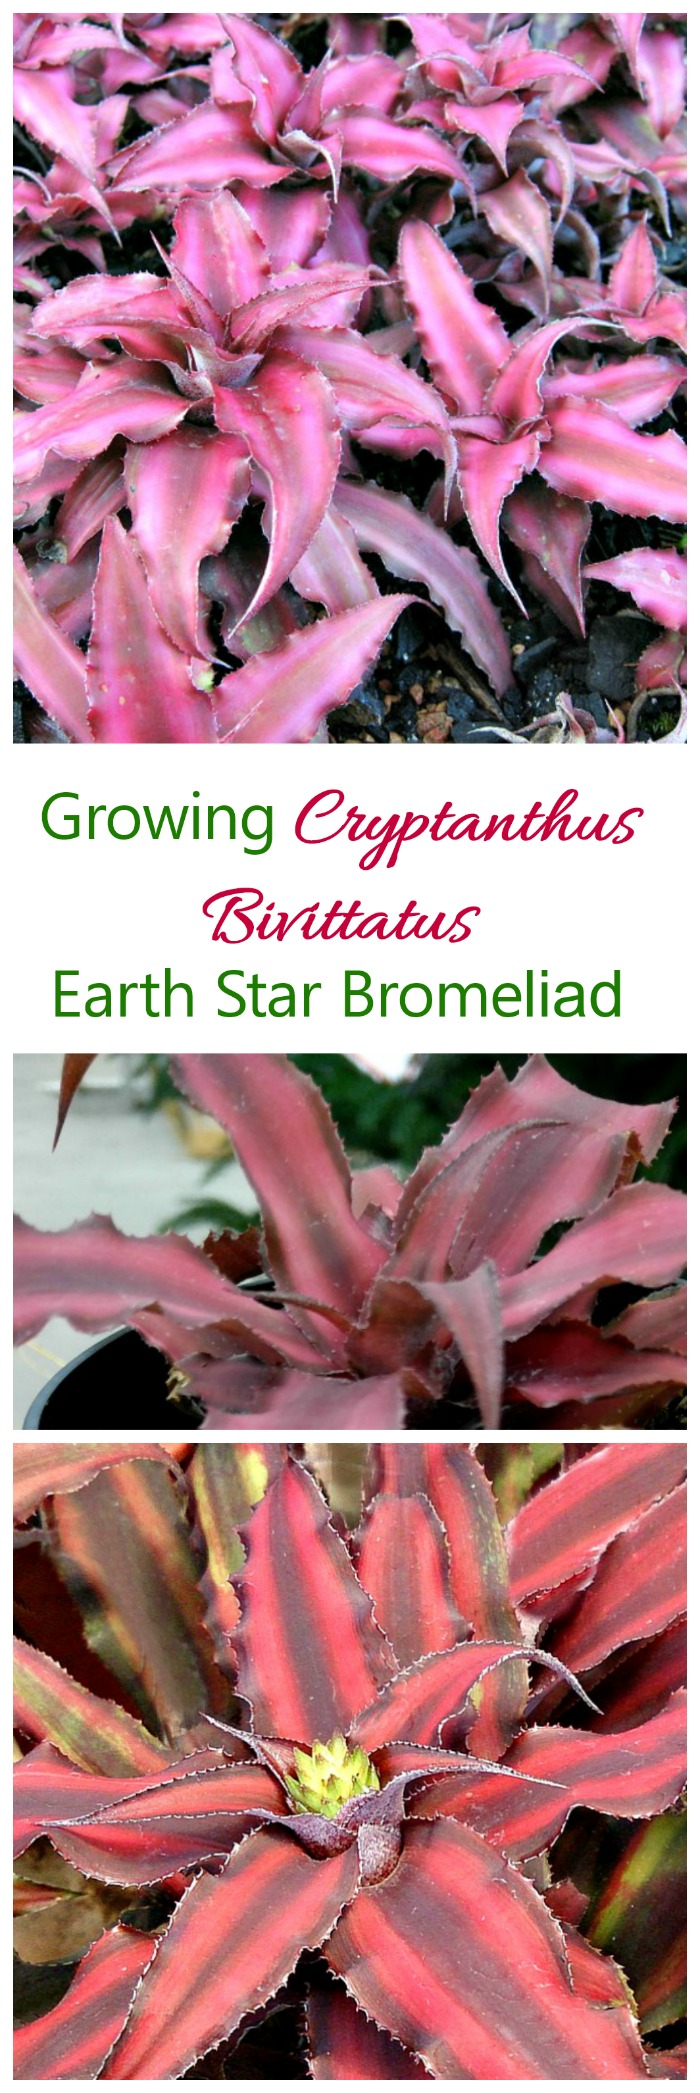 Cryptanthus Bivittatus is also known as Earth Star or Red Star bromeliad. It is easy to grow and makes a great indoor plant. #earthstar #bromeliads